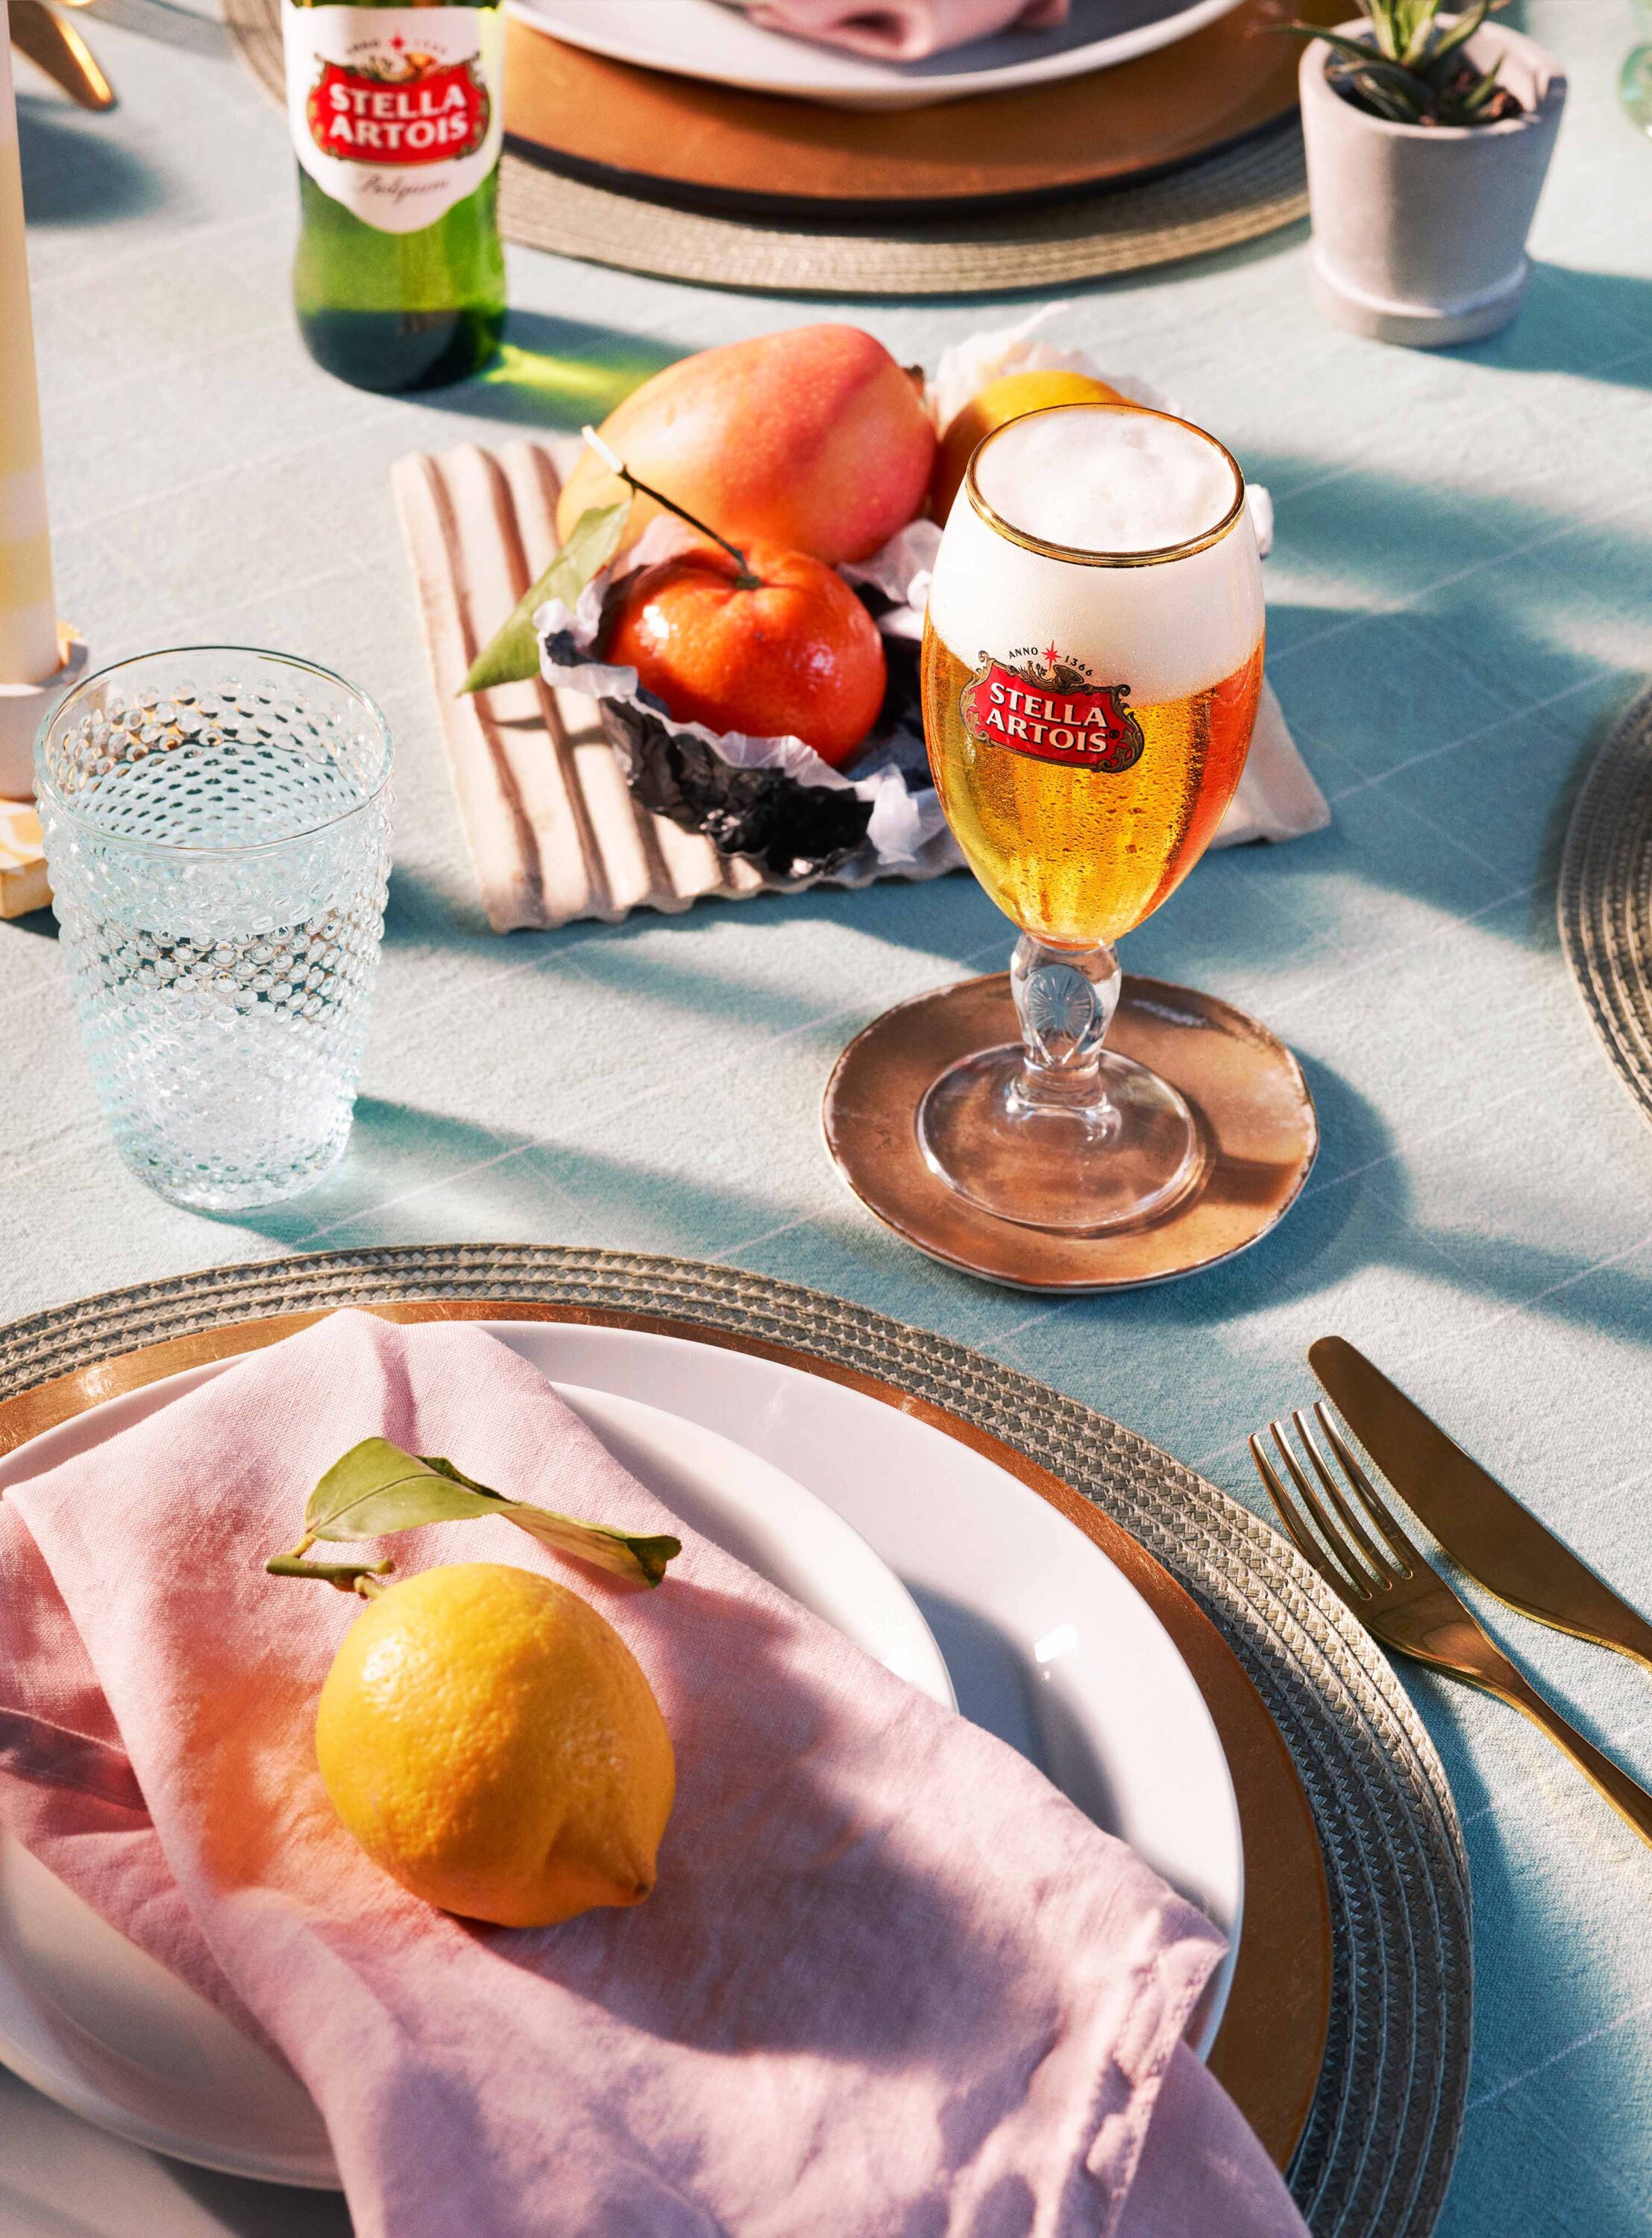 WrenAgency_FelicityMcCabe-WAS_StellaArtois_Tablescapes_AlFresco_Sideview_1_V1_sRGB